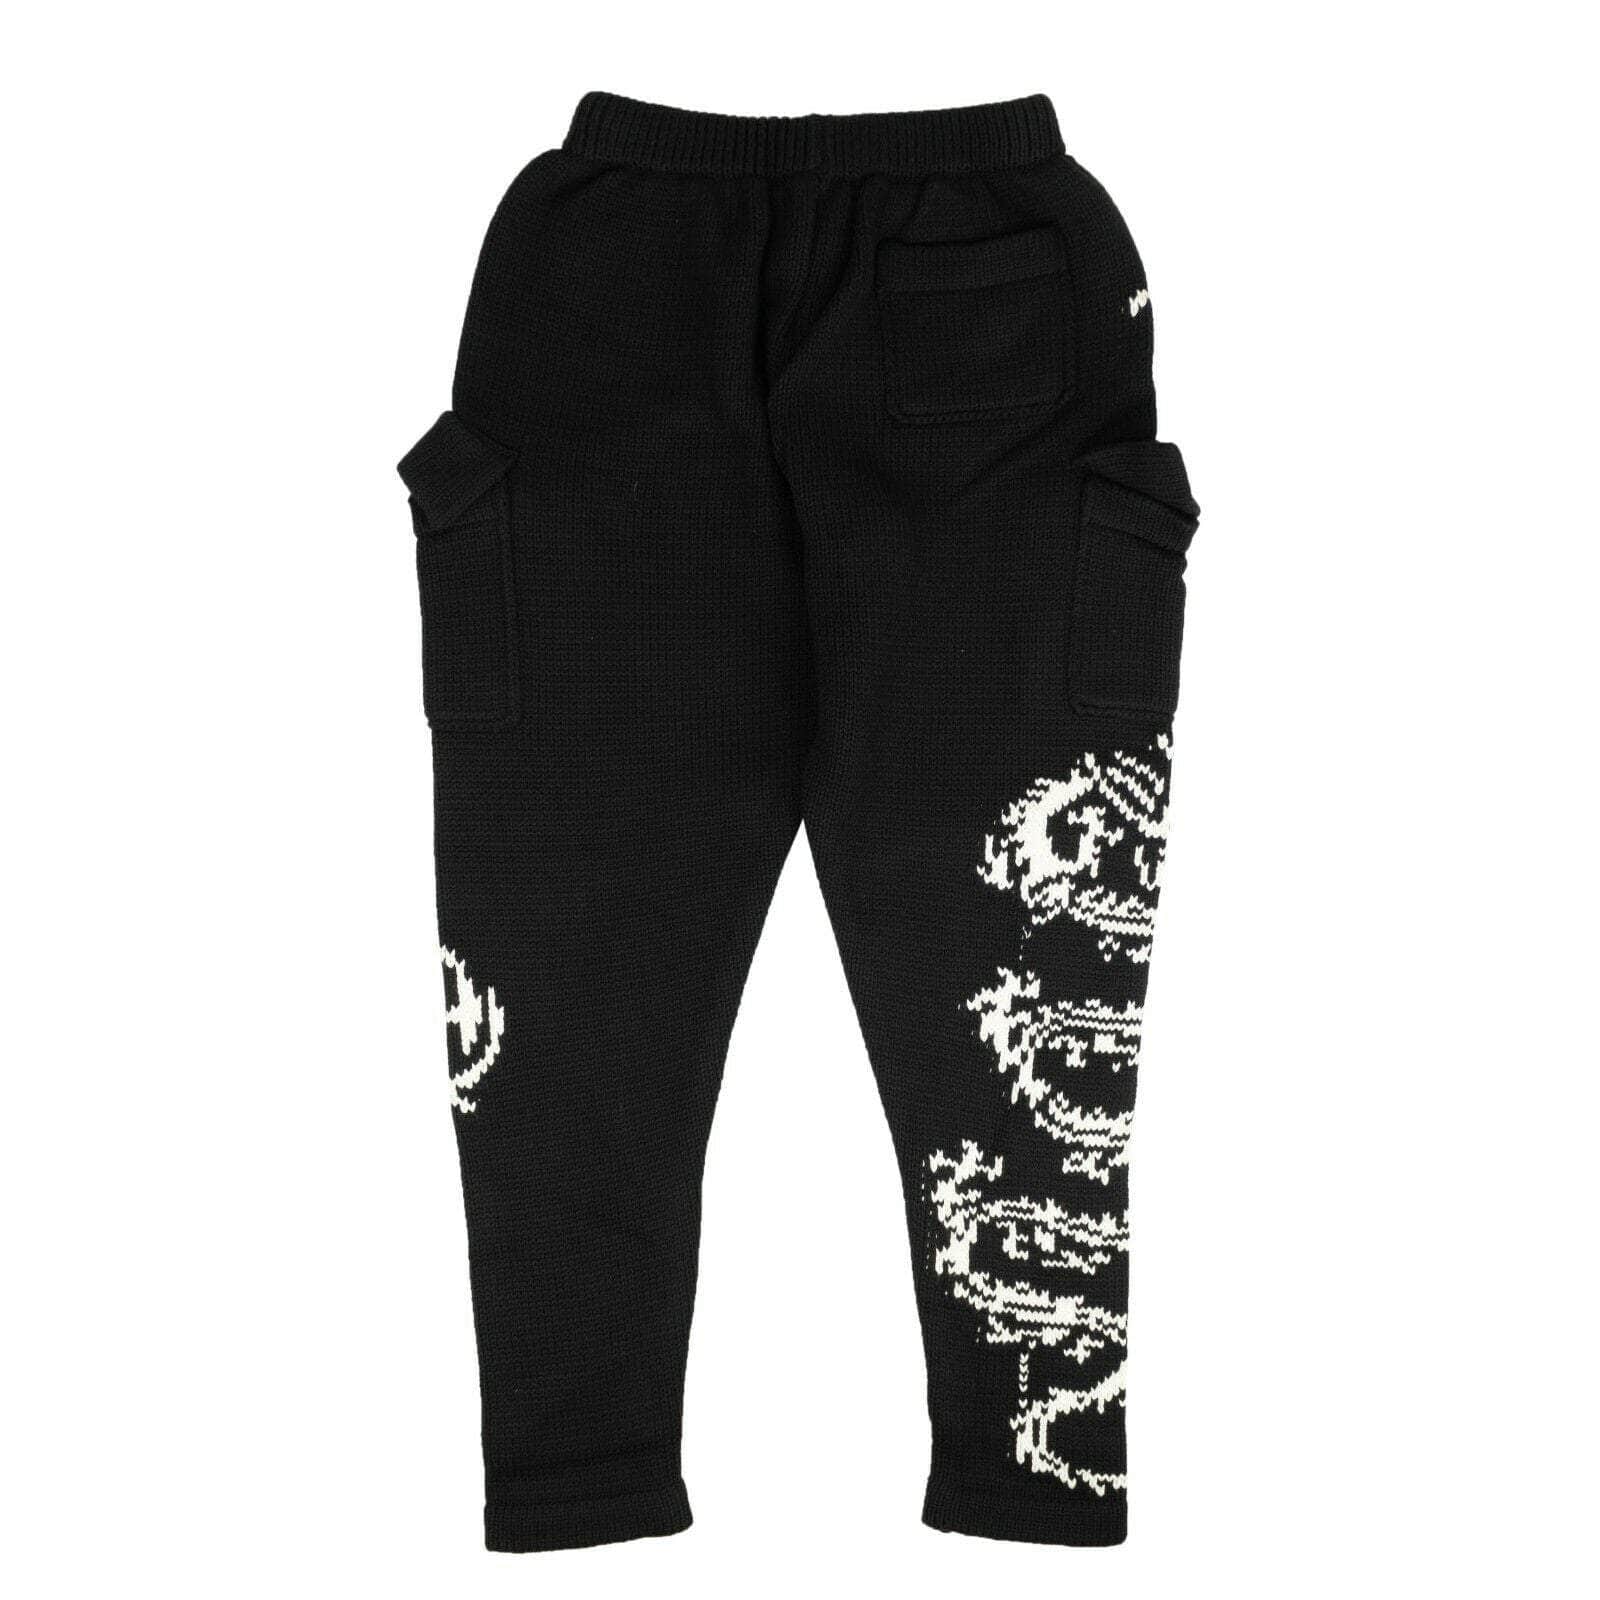 Siberia Hills 250-500, channelenable-all, chicmi, couponcollection, gender-mens, main-clothing, mens-joggers-sweatpants, mens-shoes, size-l, size-m, size-s Black Heavy Tribal Knit Sweatpants